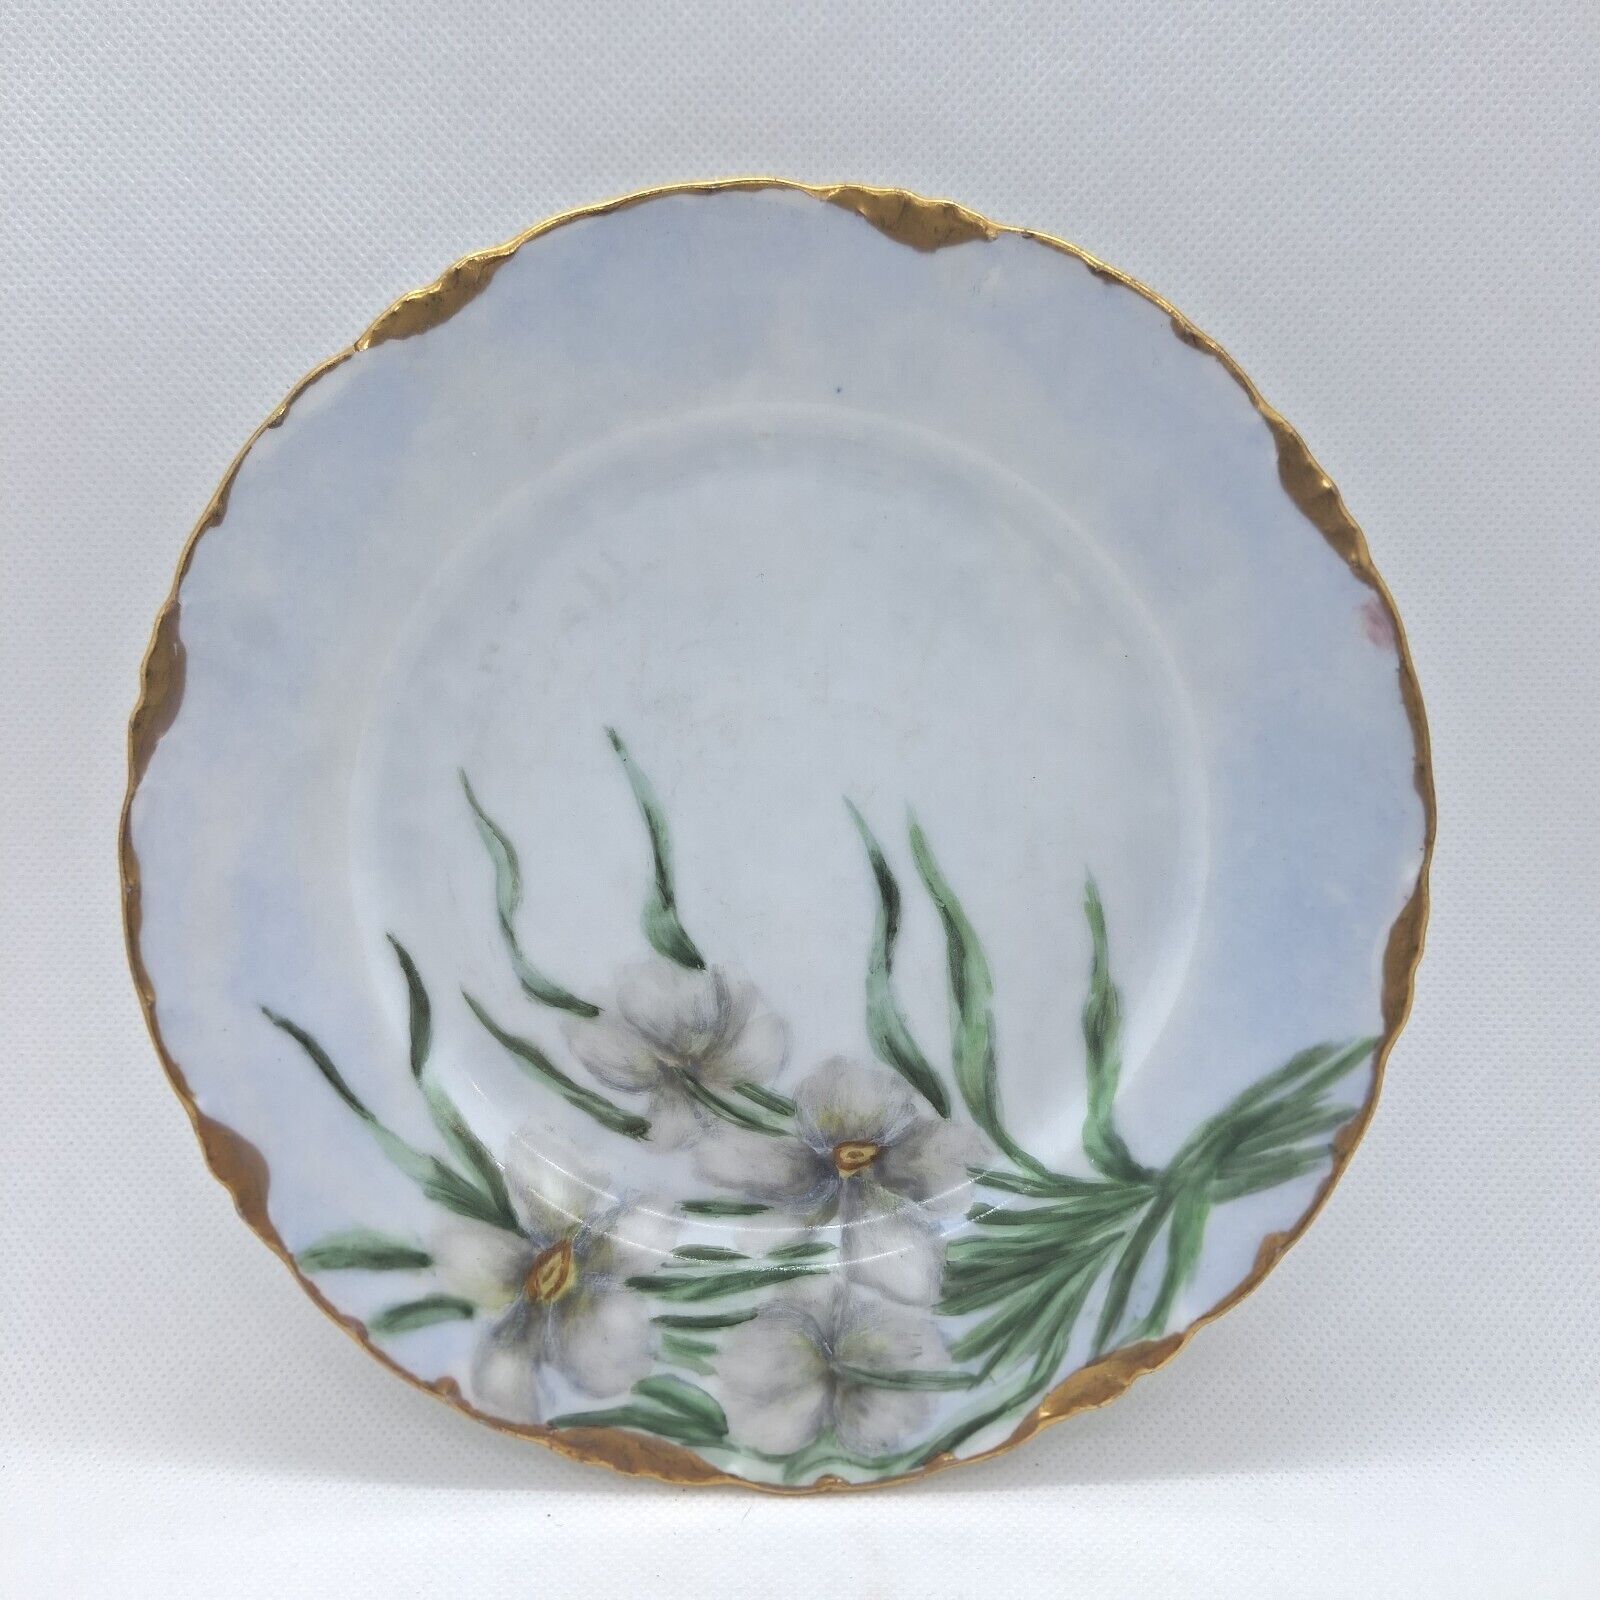 Rosenthale Bavaria Hand Painted Floral Plate 1909 Antique